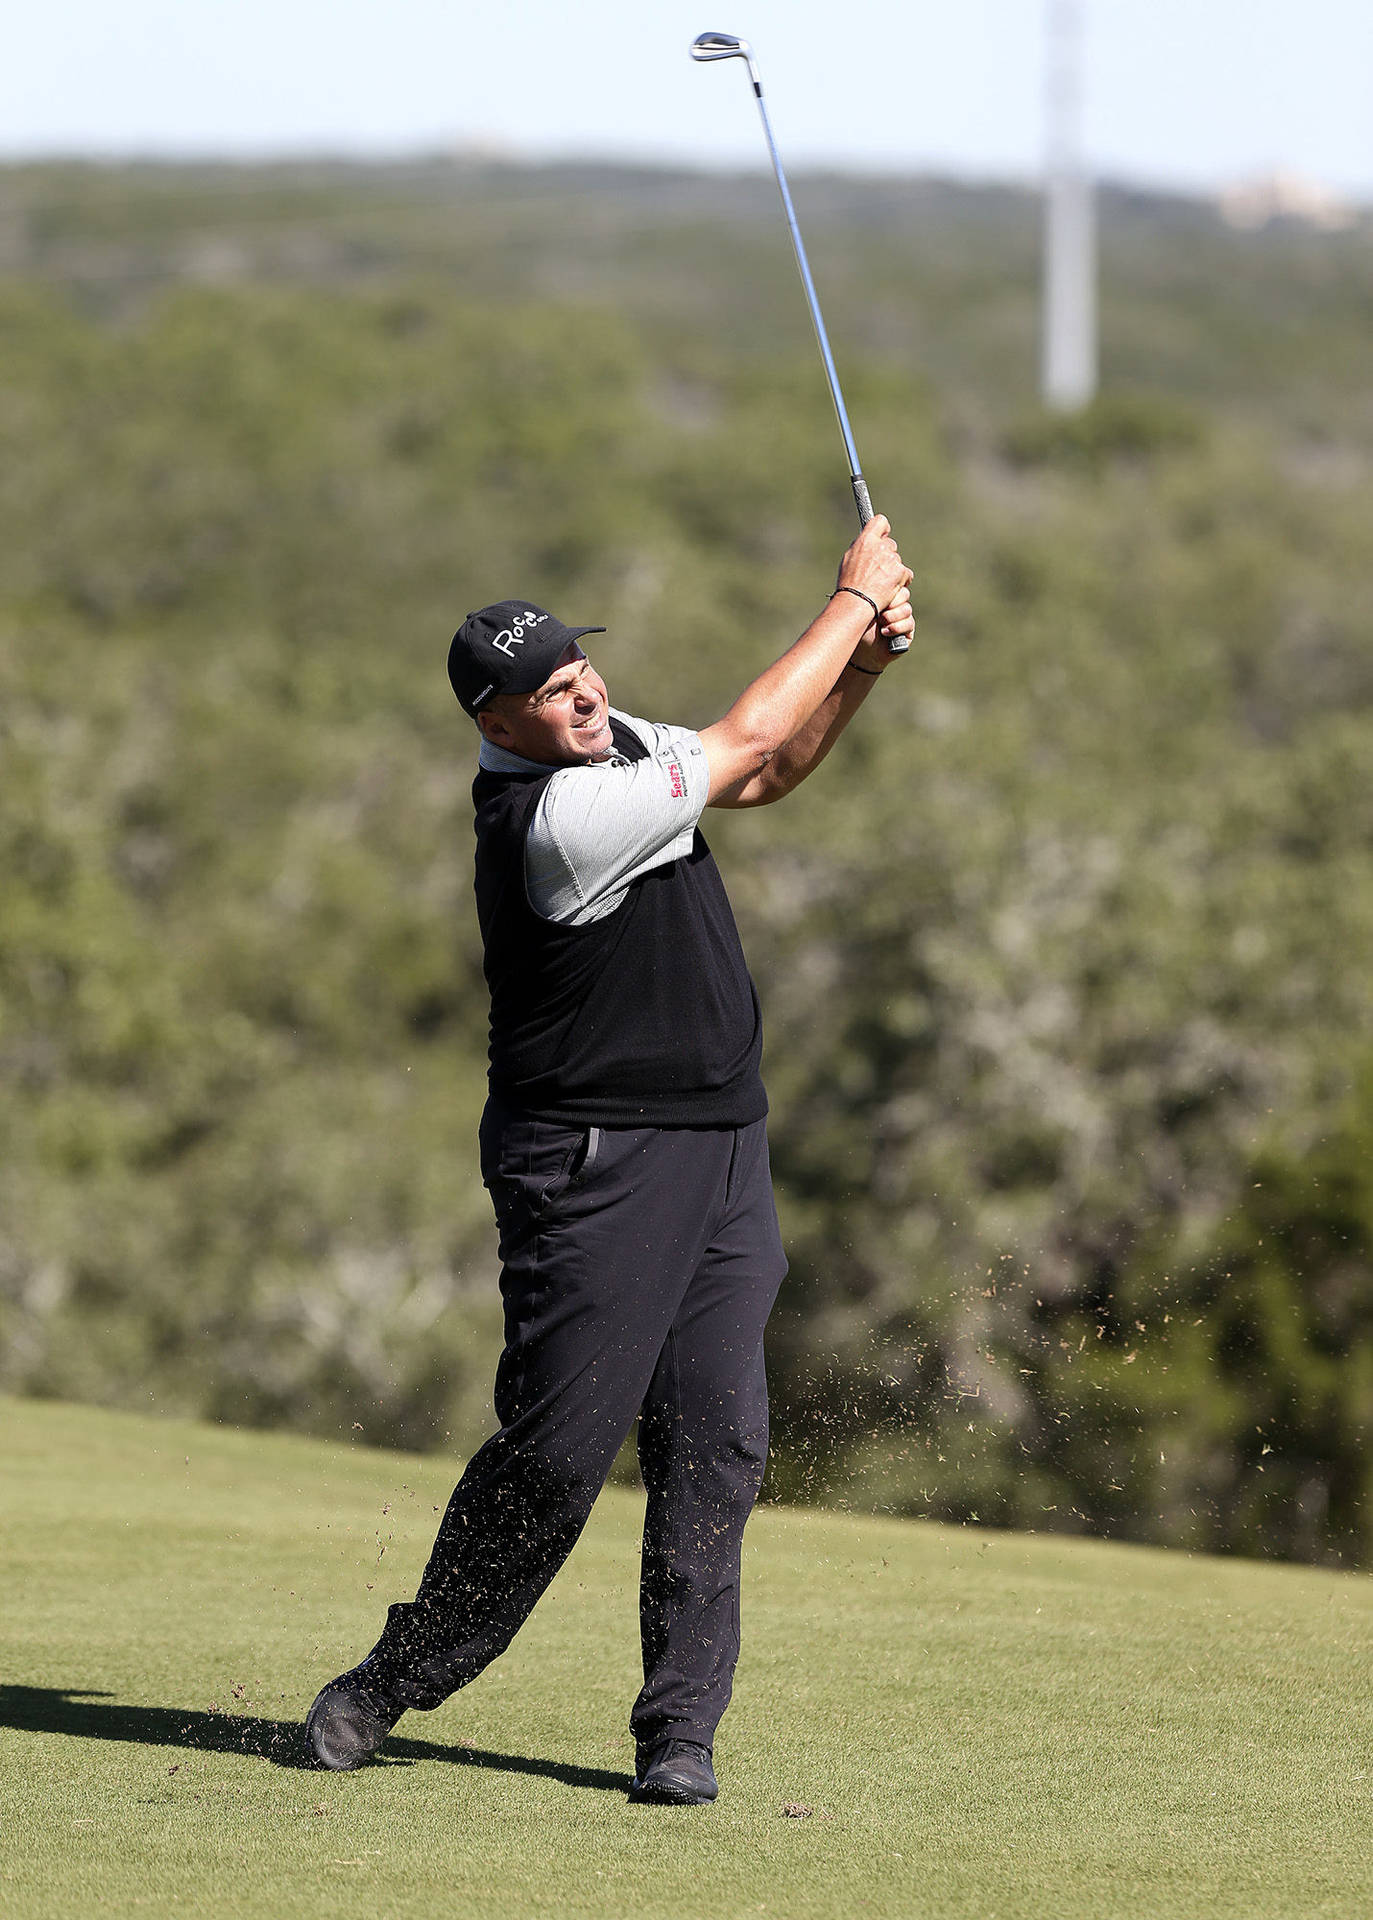 Professional Golfer Rocco Mediate In Action Wallpaper